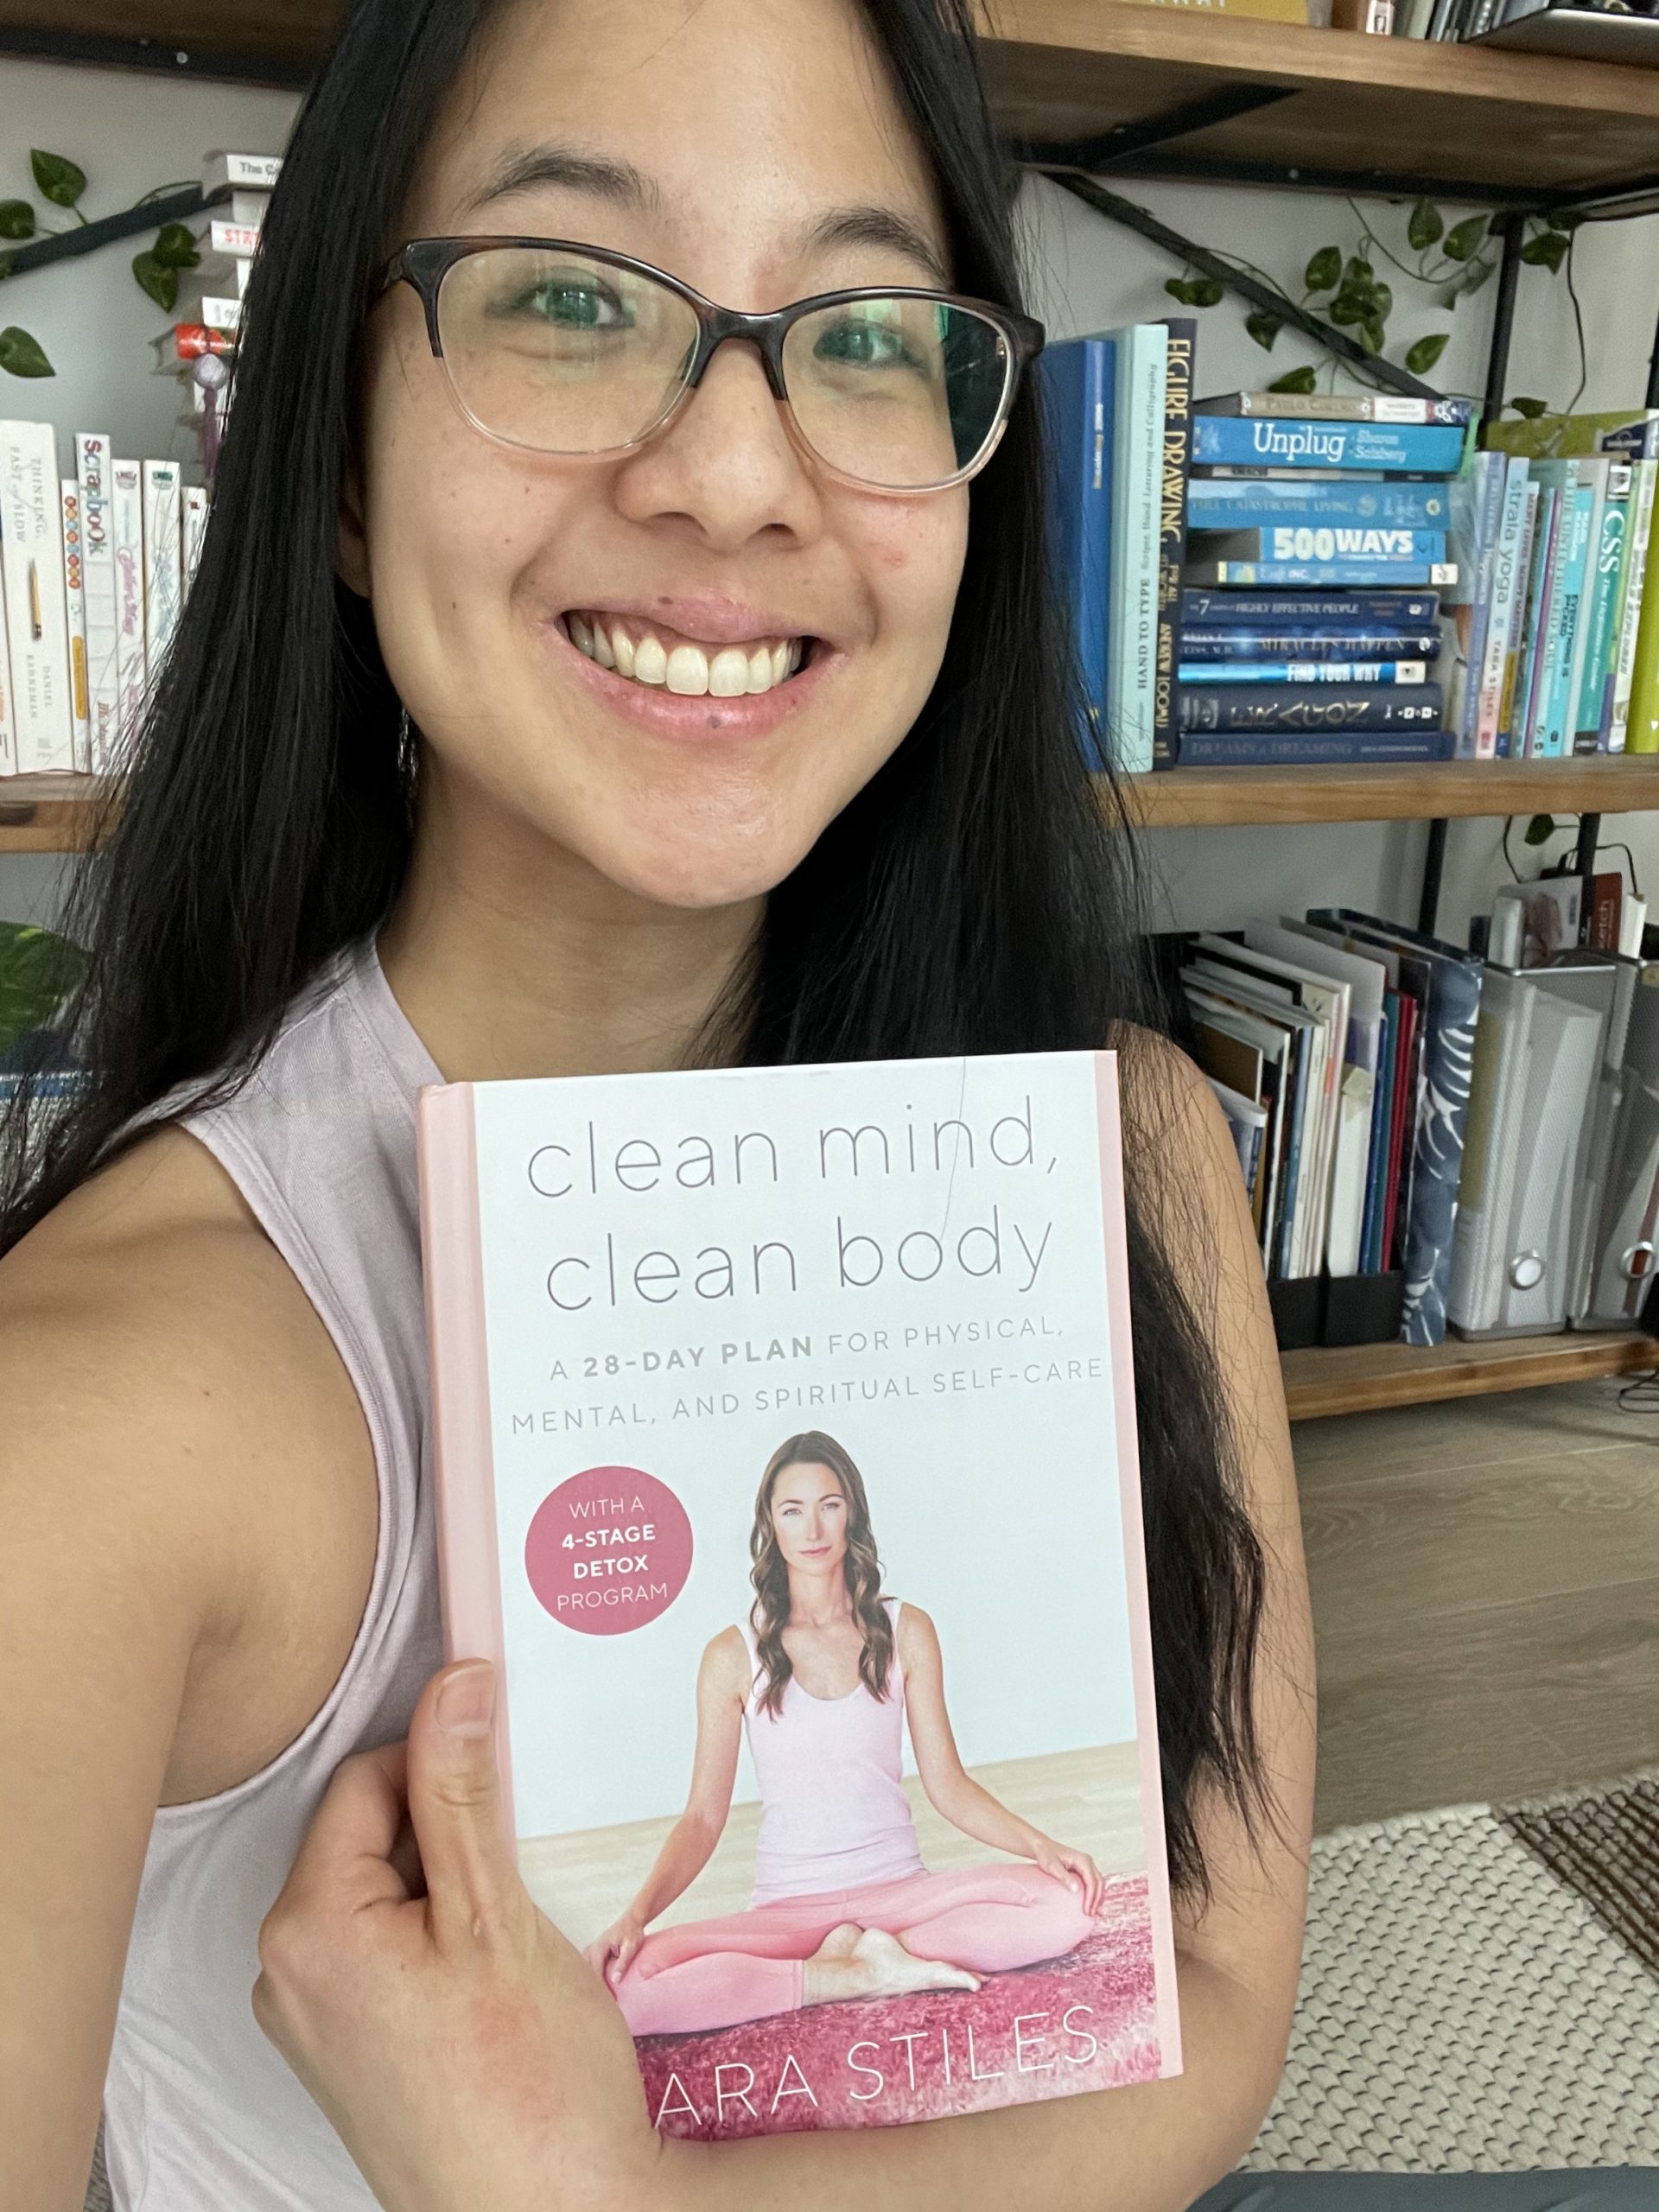 Jessica Lock holding the book Clean Mind Clean Body, talks about slowing down